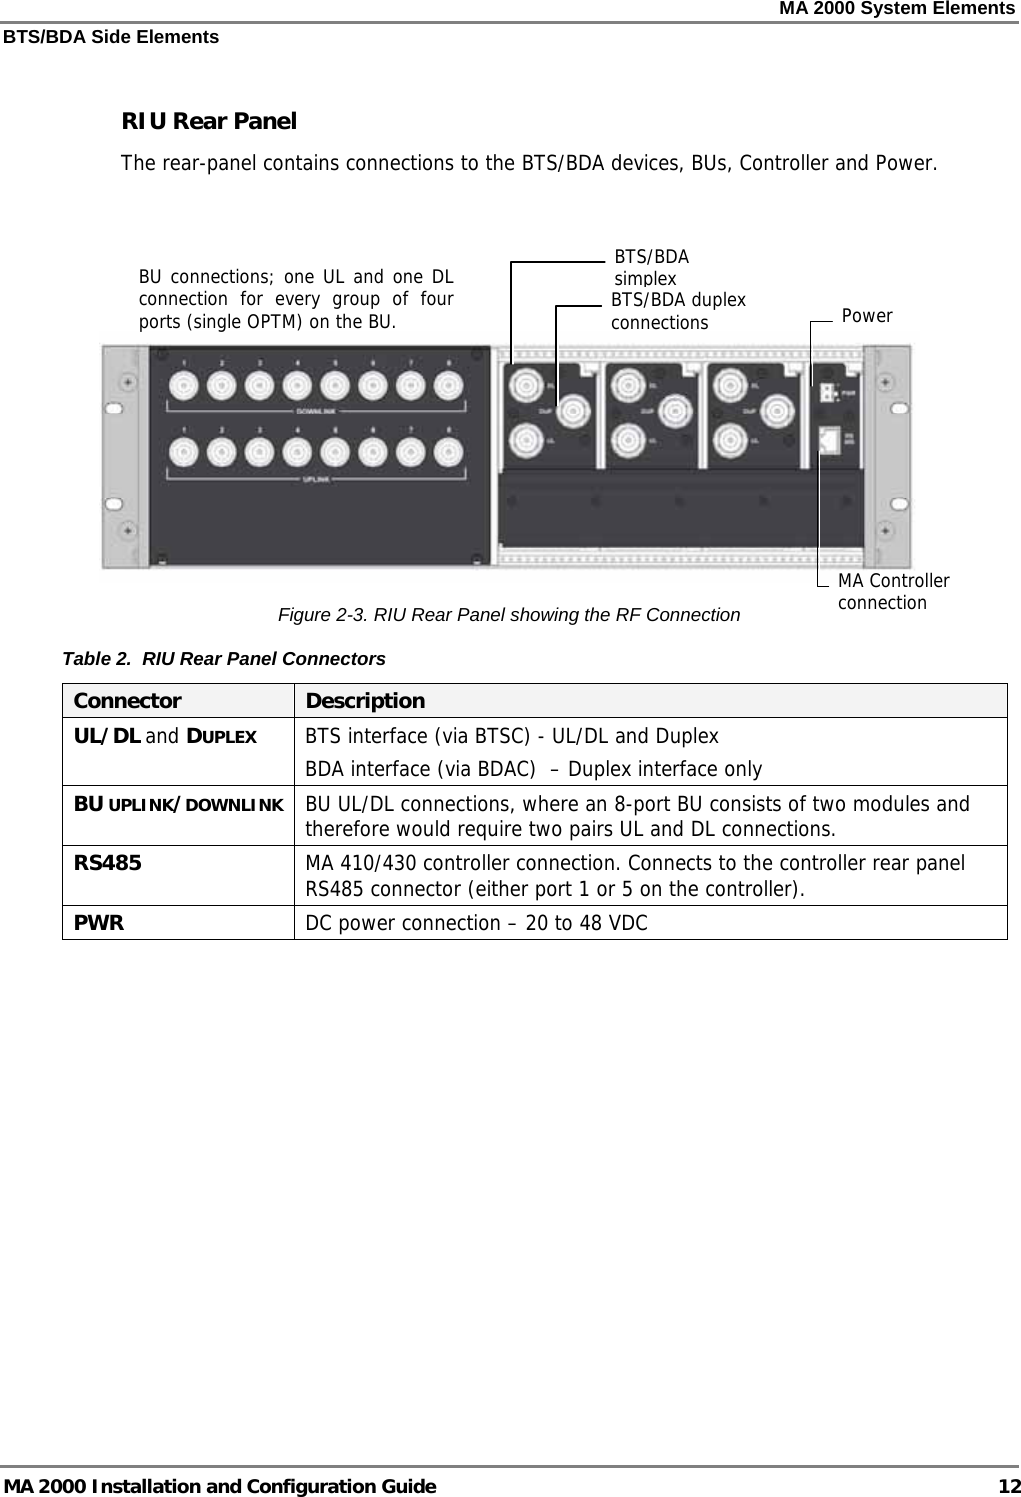 MA 2000 System Elements BTS/BDA Side Elements MA 2000 Installation and Configuration Guide  12  RIU Rear Panel The rear-panel contains connections to the BTS/BDA devices, BUs, Controller and Power.     Figure  2-3. RIU Rear Panel showing the RF Connection Table  2.  RIU Rear Panel Connectors Connector  Description UL/DL and DUPLEX BTS interface (via BTSC) - UL/DL and Duplex BDA interface (via BDAC)  – Duplex interface only  BU UPLINK/DOWNLINK BU UL/DL connections, where an 8-port BU consists of two modules and therefore would require two pairs UL and DL connections. RS485  MA 410/430 controller connection. Connects to the controller rear panel RS485 connector (either port 1 or 5 on the controller). PWR  DC power connection – 20 to 48 VDC  BU connections; one UL and one DL connection for every group of four ports (single OPTM) on the BU.   Power MA Controller connection BTS/BDA simplex  BTS/BDA duplex connections 